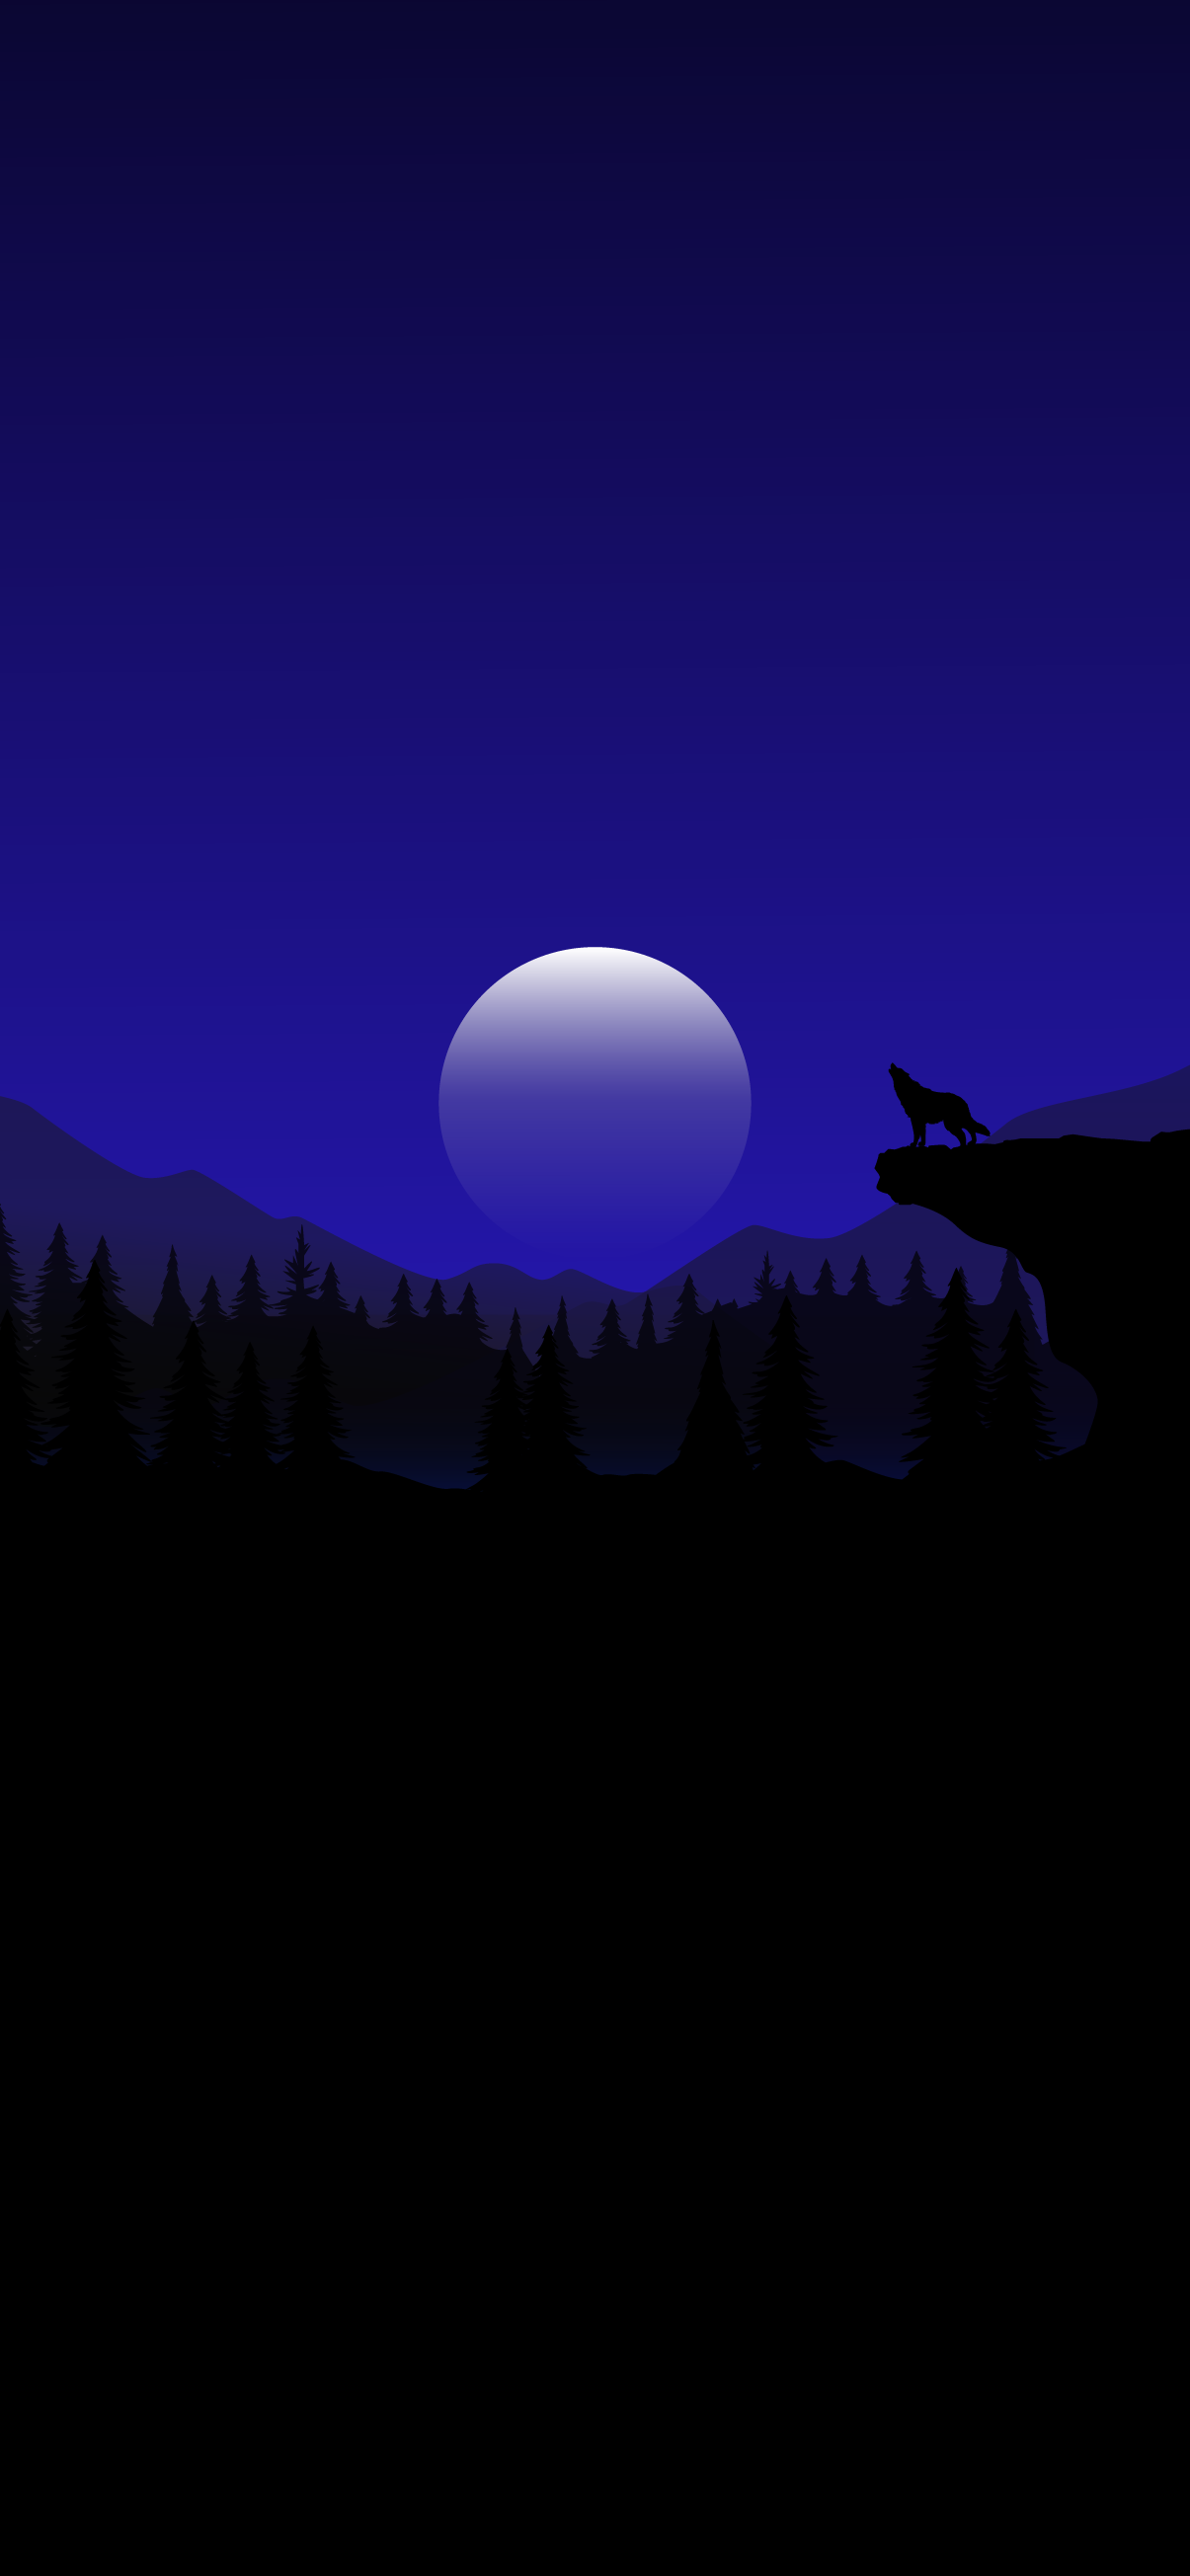 Moon night and wolf howling black amoled iphone wallpaper beautiful in 4k